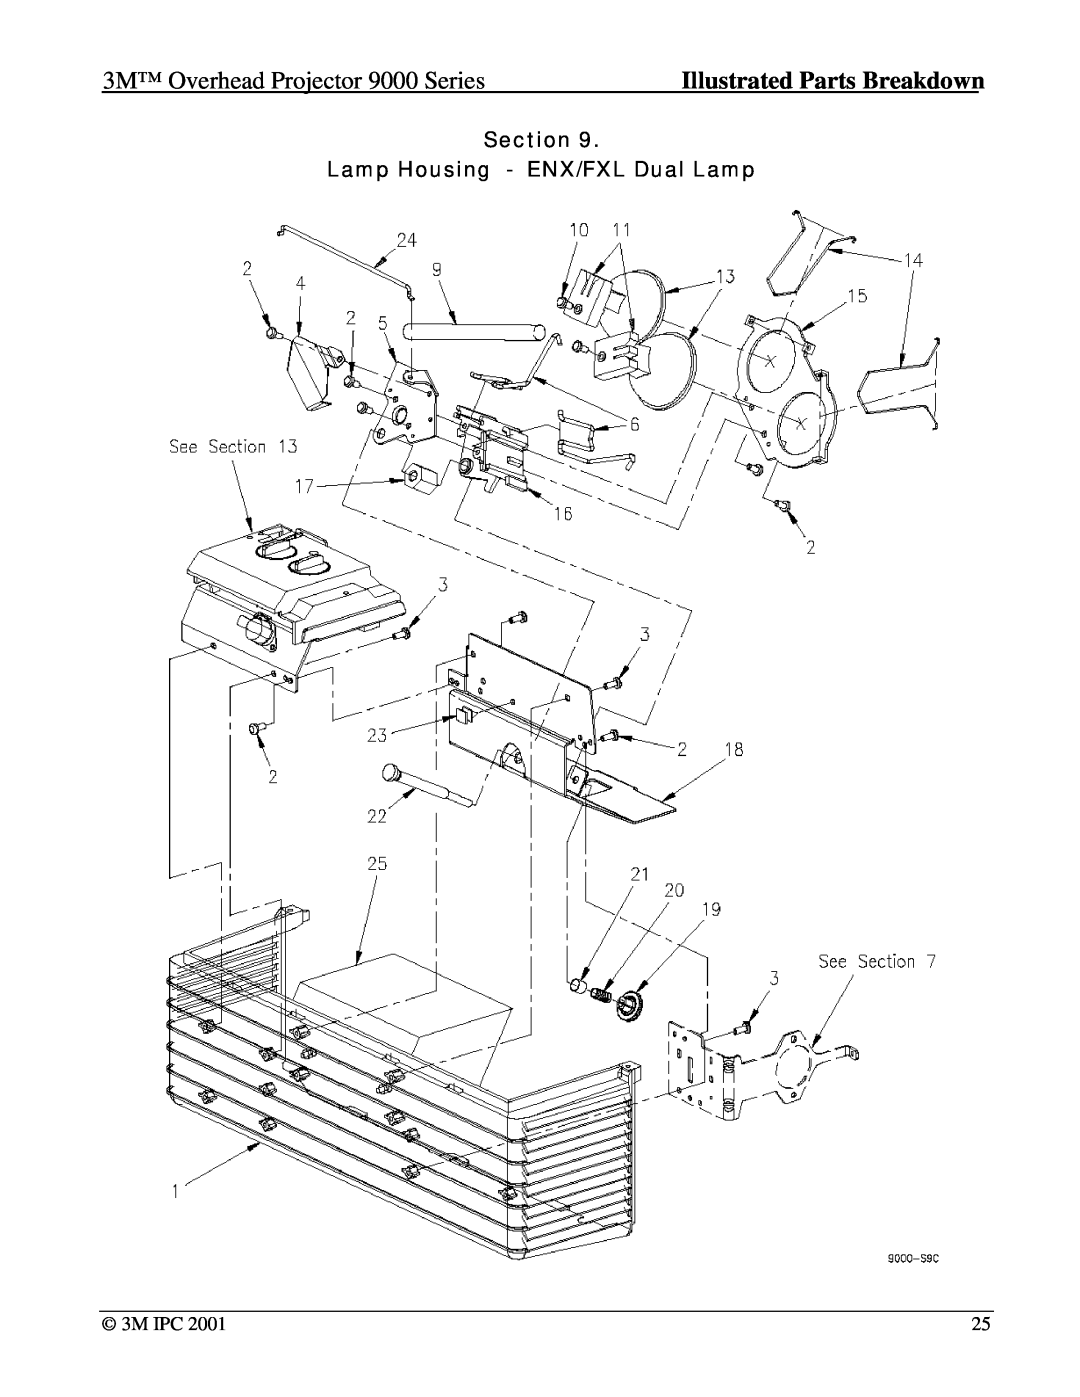 Xerox 9076, 9550 Section Lamp Housing - ENX/FXL Dual Lamp, 3M Overhead Projector 9000 Series, Illustrated Parts Breakdown 